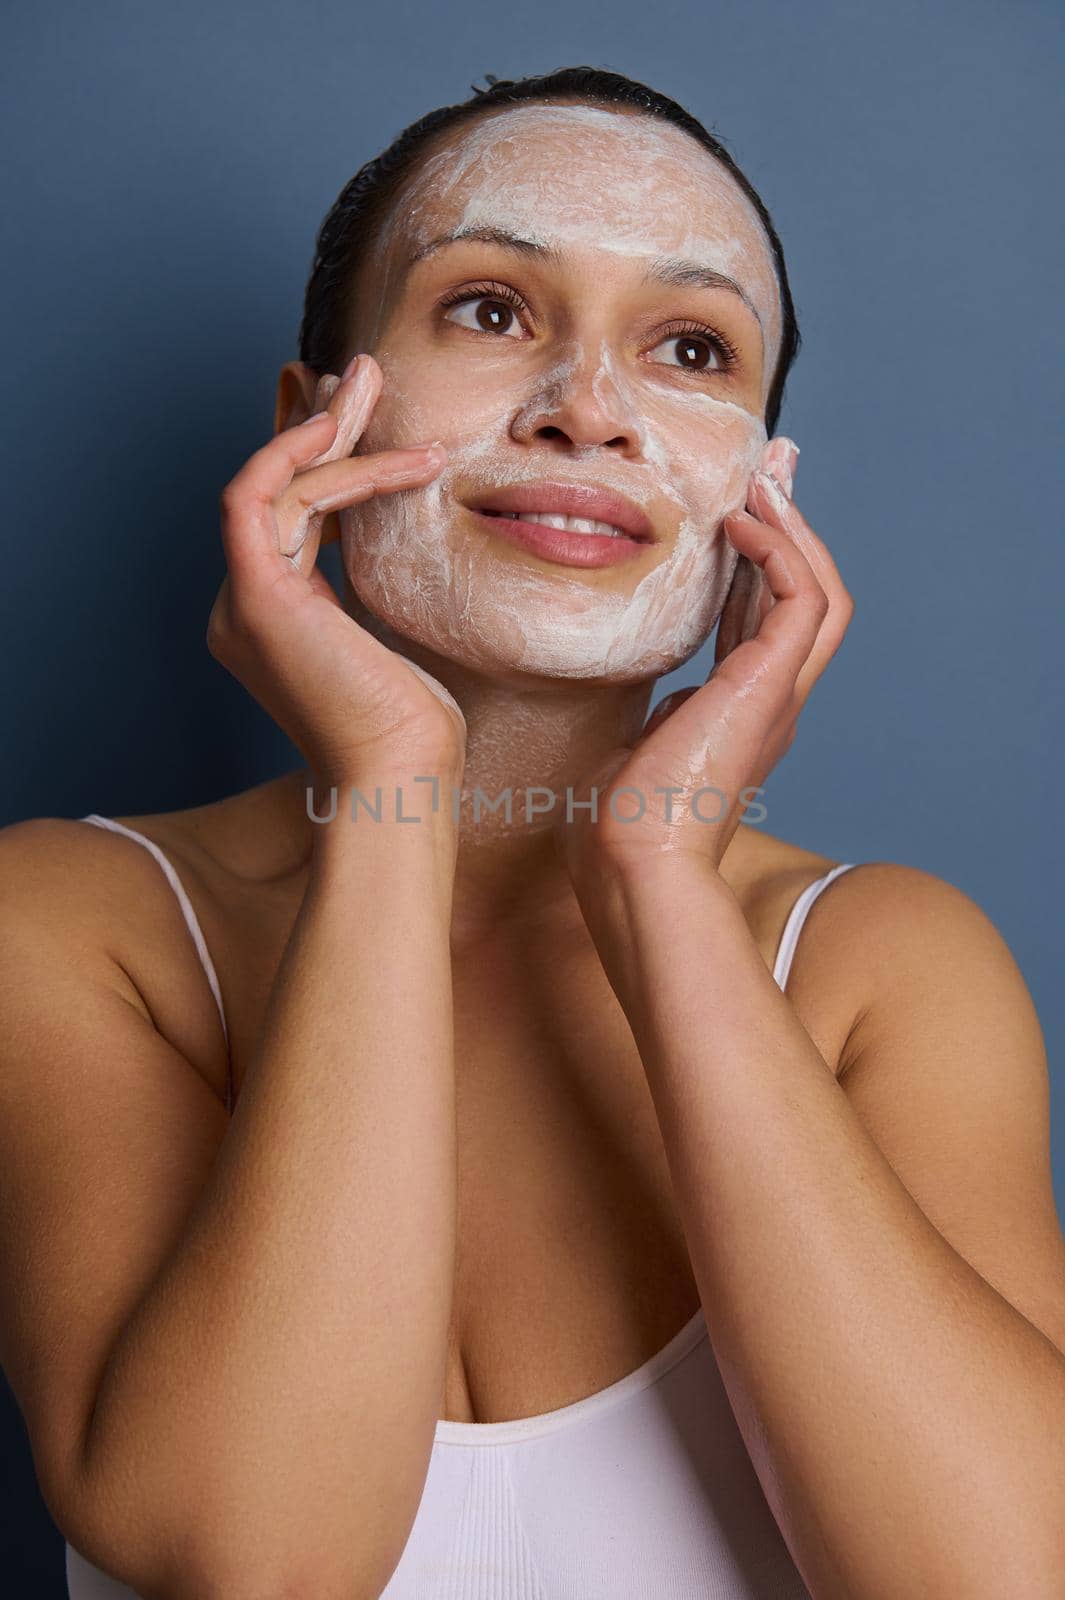 Beautiful woman applying foam cleansing cosmetic product on her face, doing massage movements, removing make-up and refreshing her skin using an exfoliant beauty product, isolated over gray background